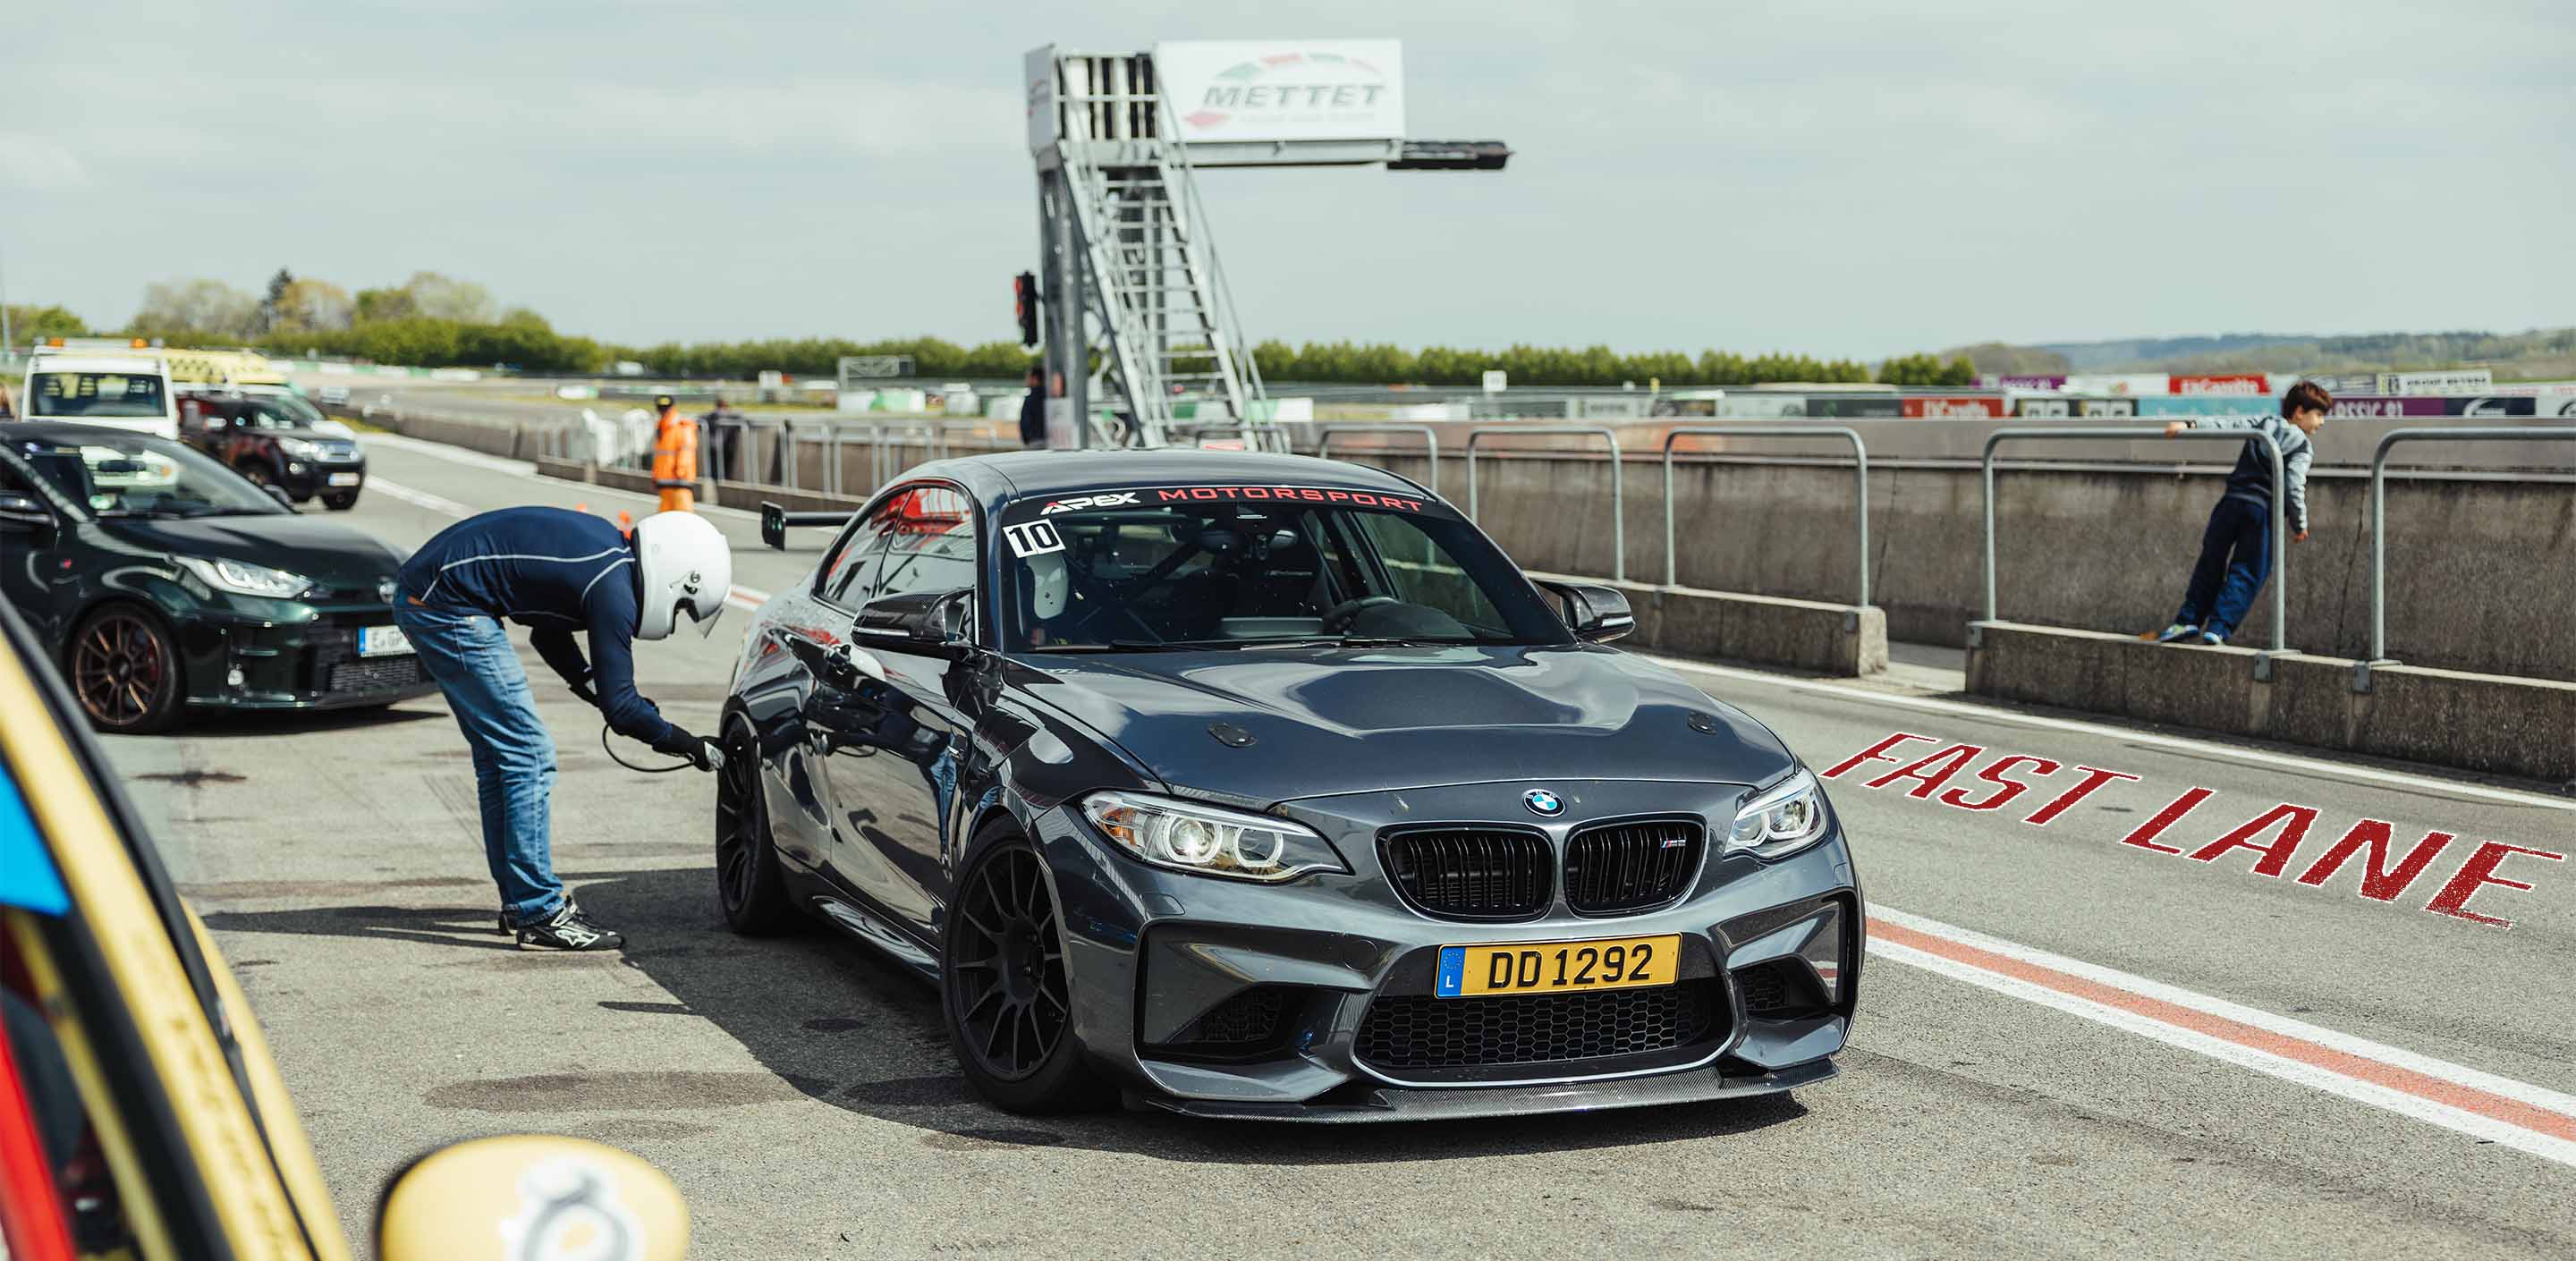 A driver of a BMW M2 checks his tyre pressure in the Pitlane at Circuit Mettet during a GP Days Open Pitlane Track Day